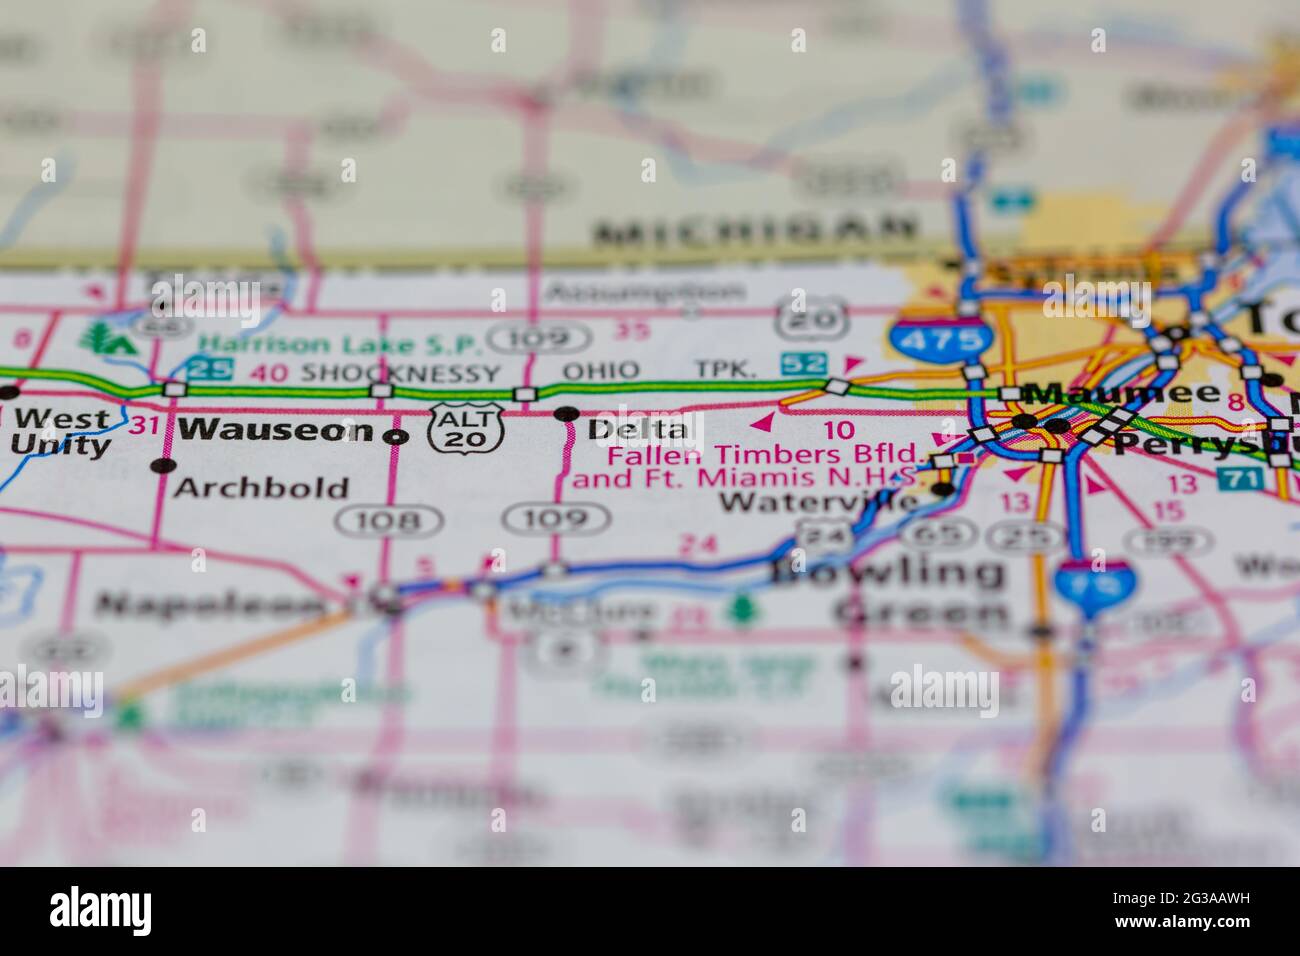 Delta Ohio USA shown on a Geography map or Road map Stock Photo